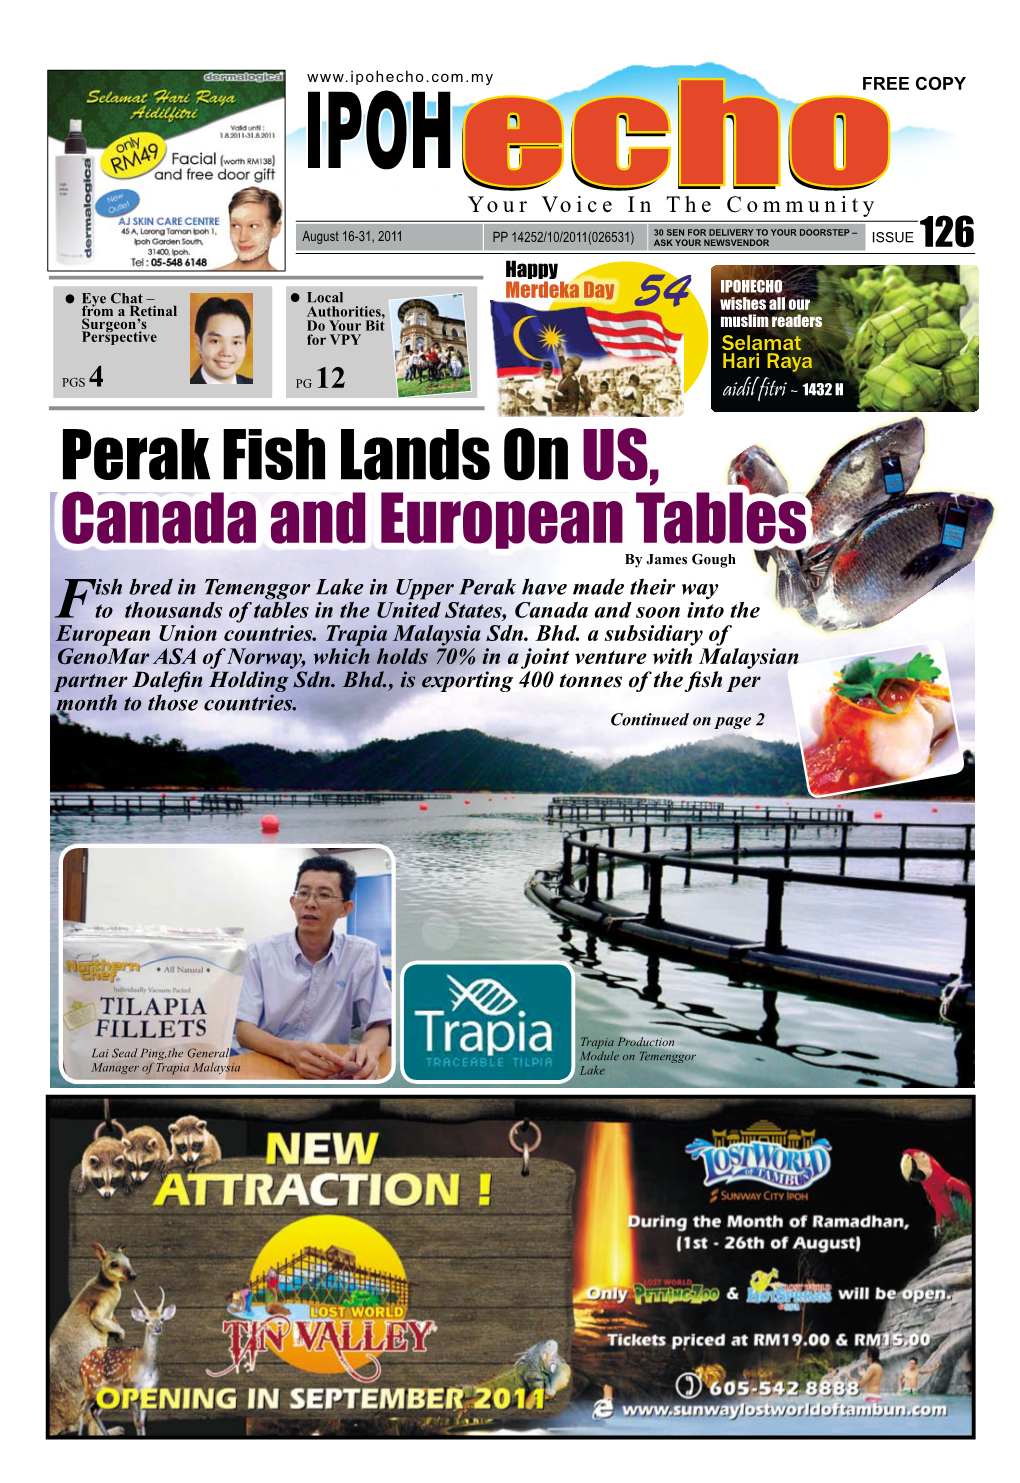 Perak Fish Lands on US, Canada and European Tables